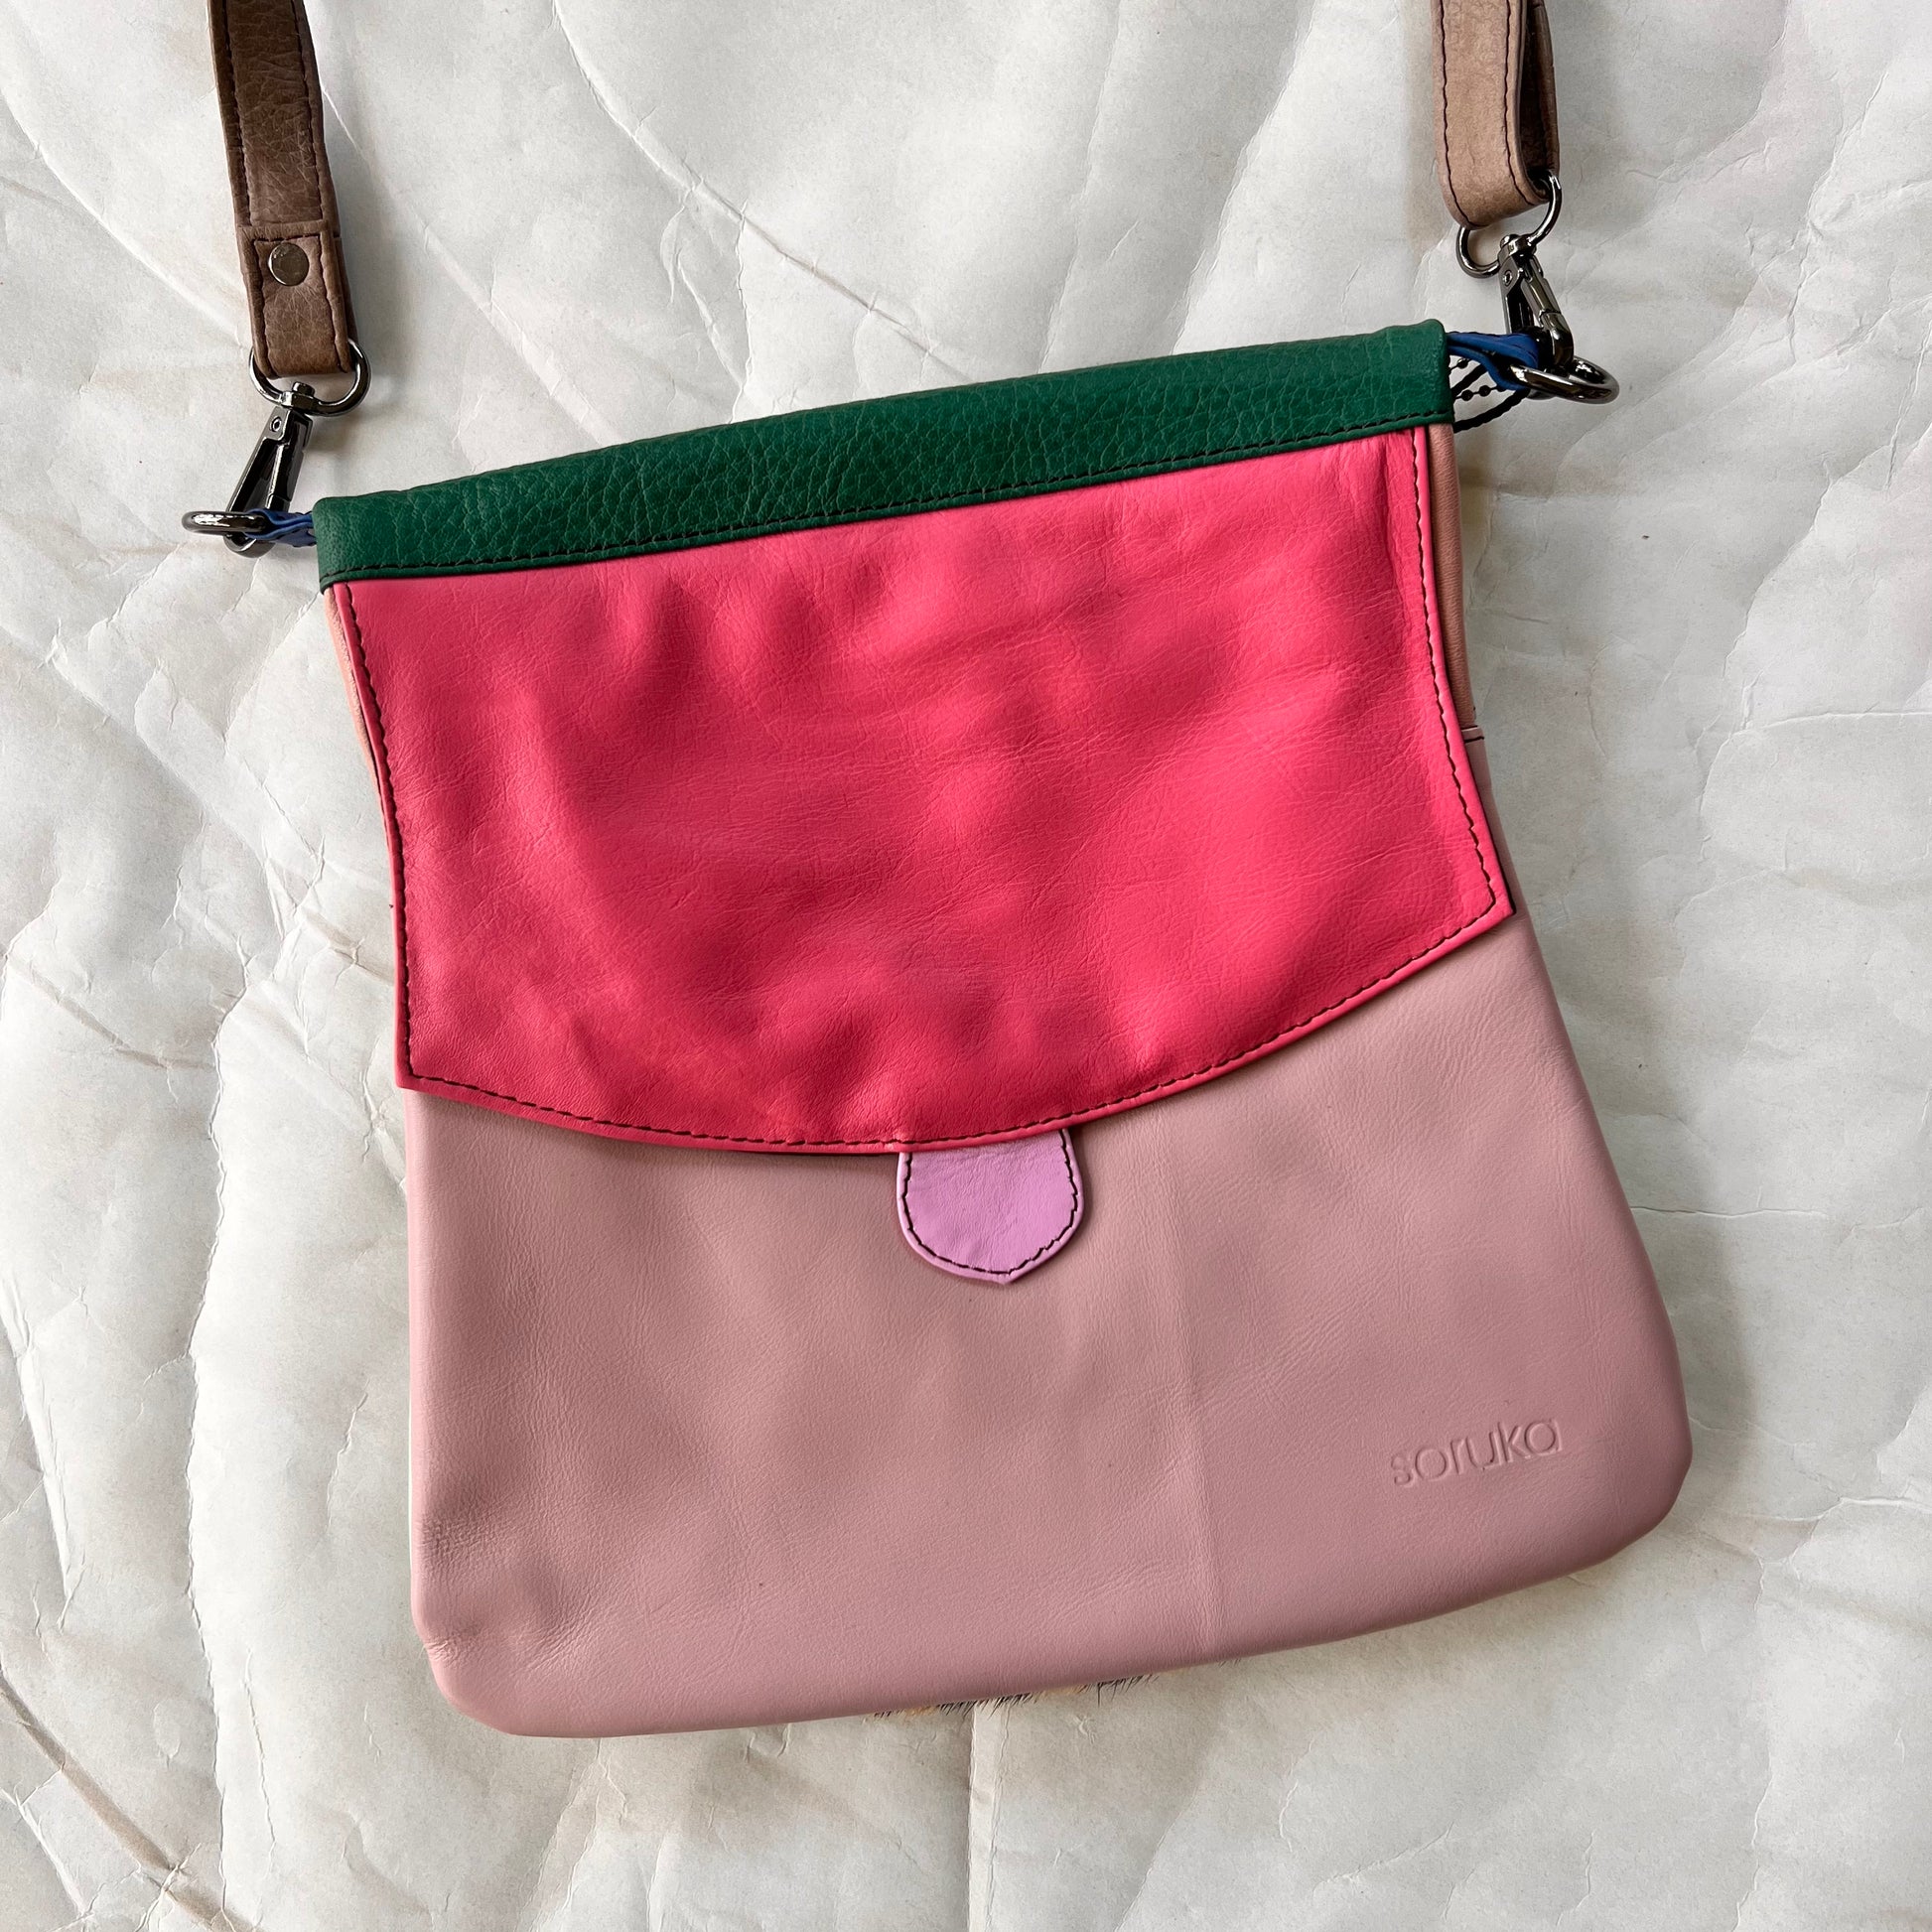 greta bag with pink flap over lilac body.